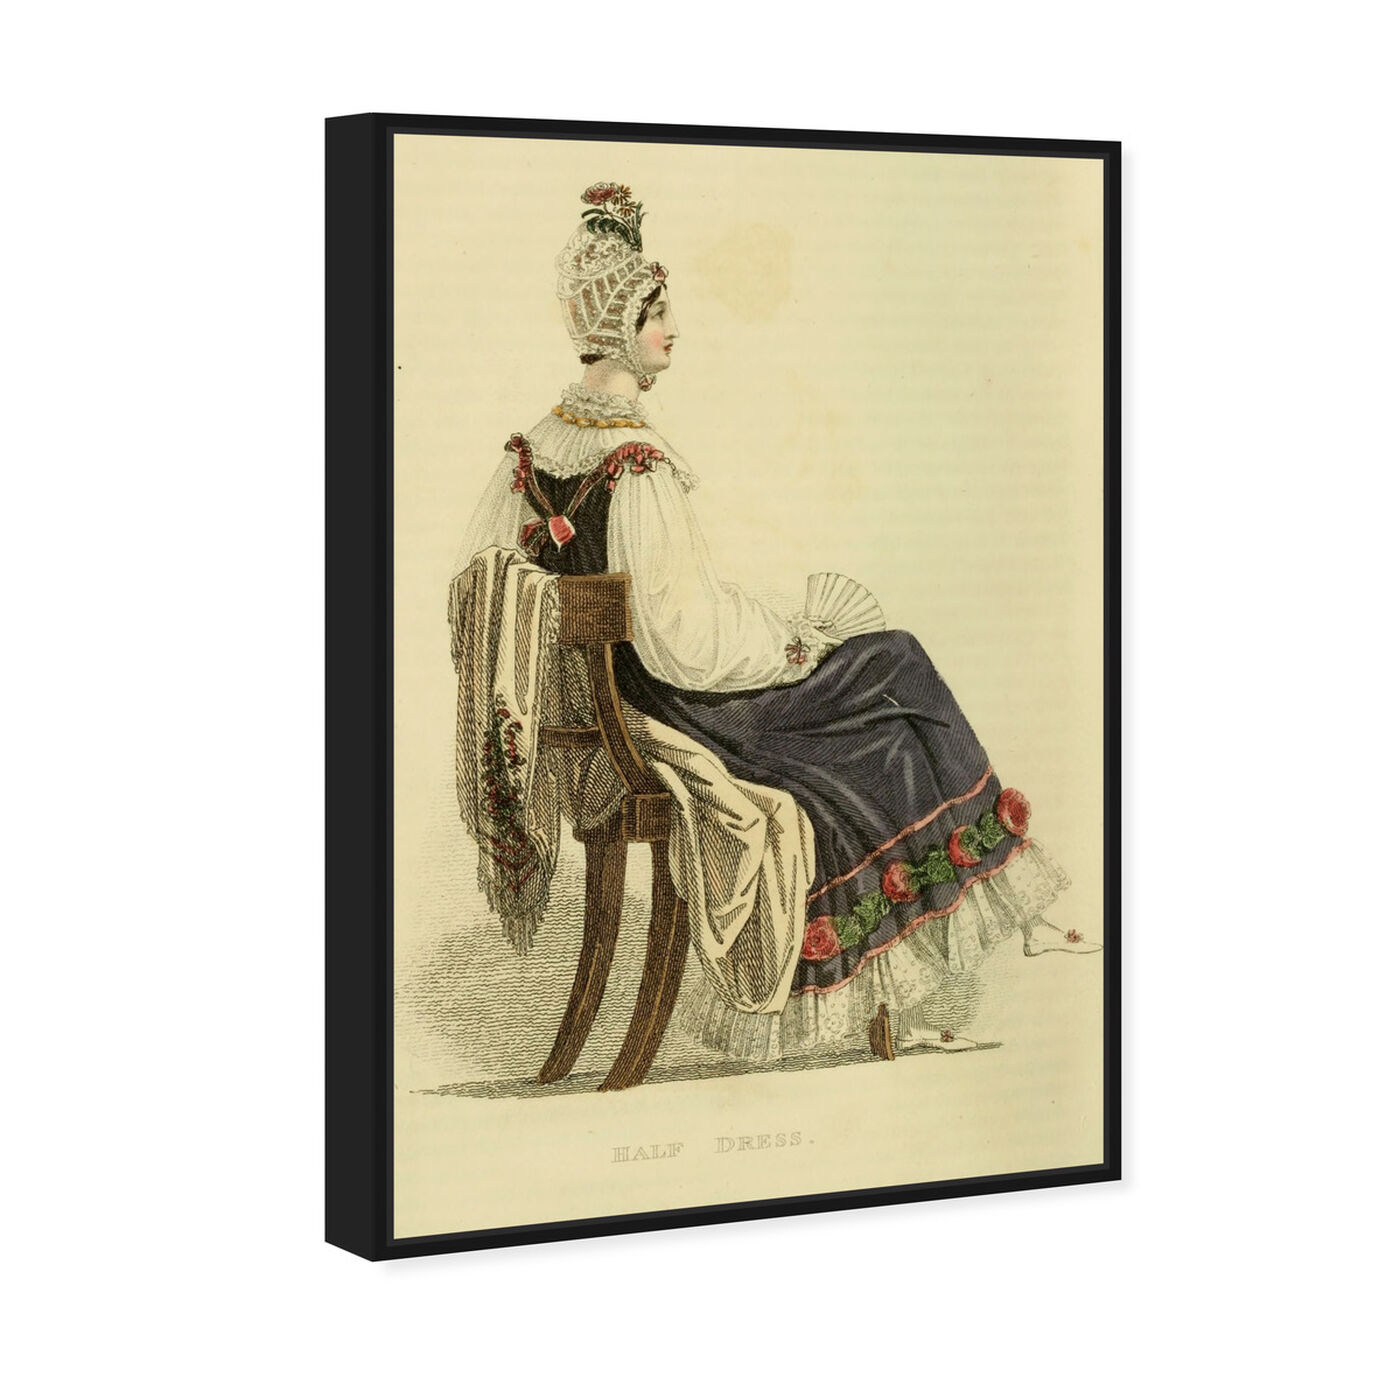 Angled view of Half Dress - The Art Cabinet featuring classic and figurative and french décor art.